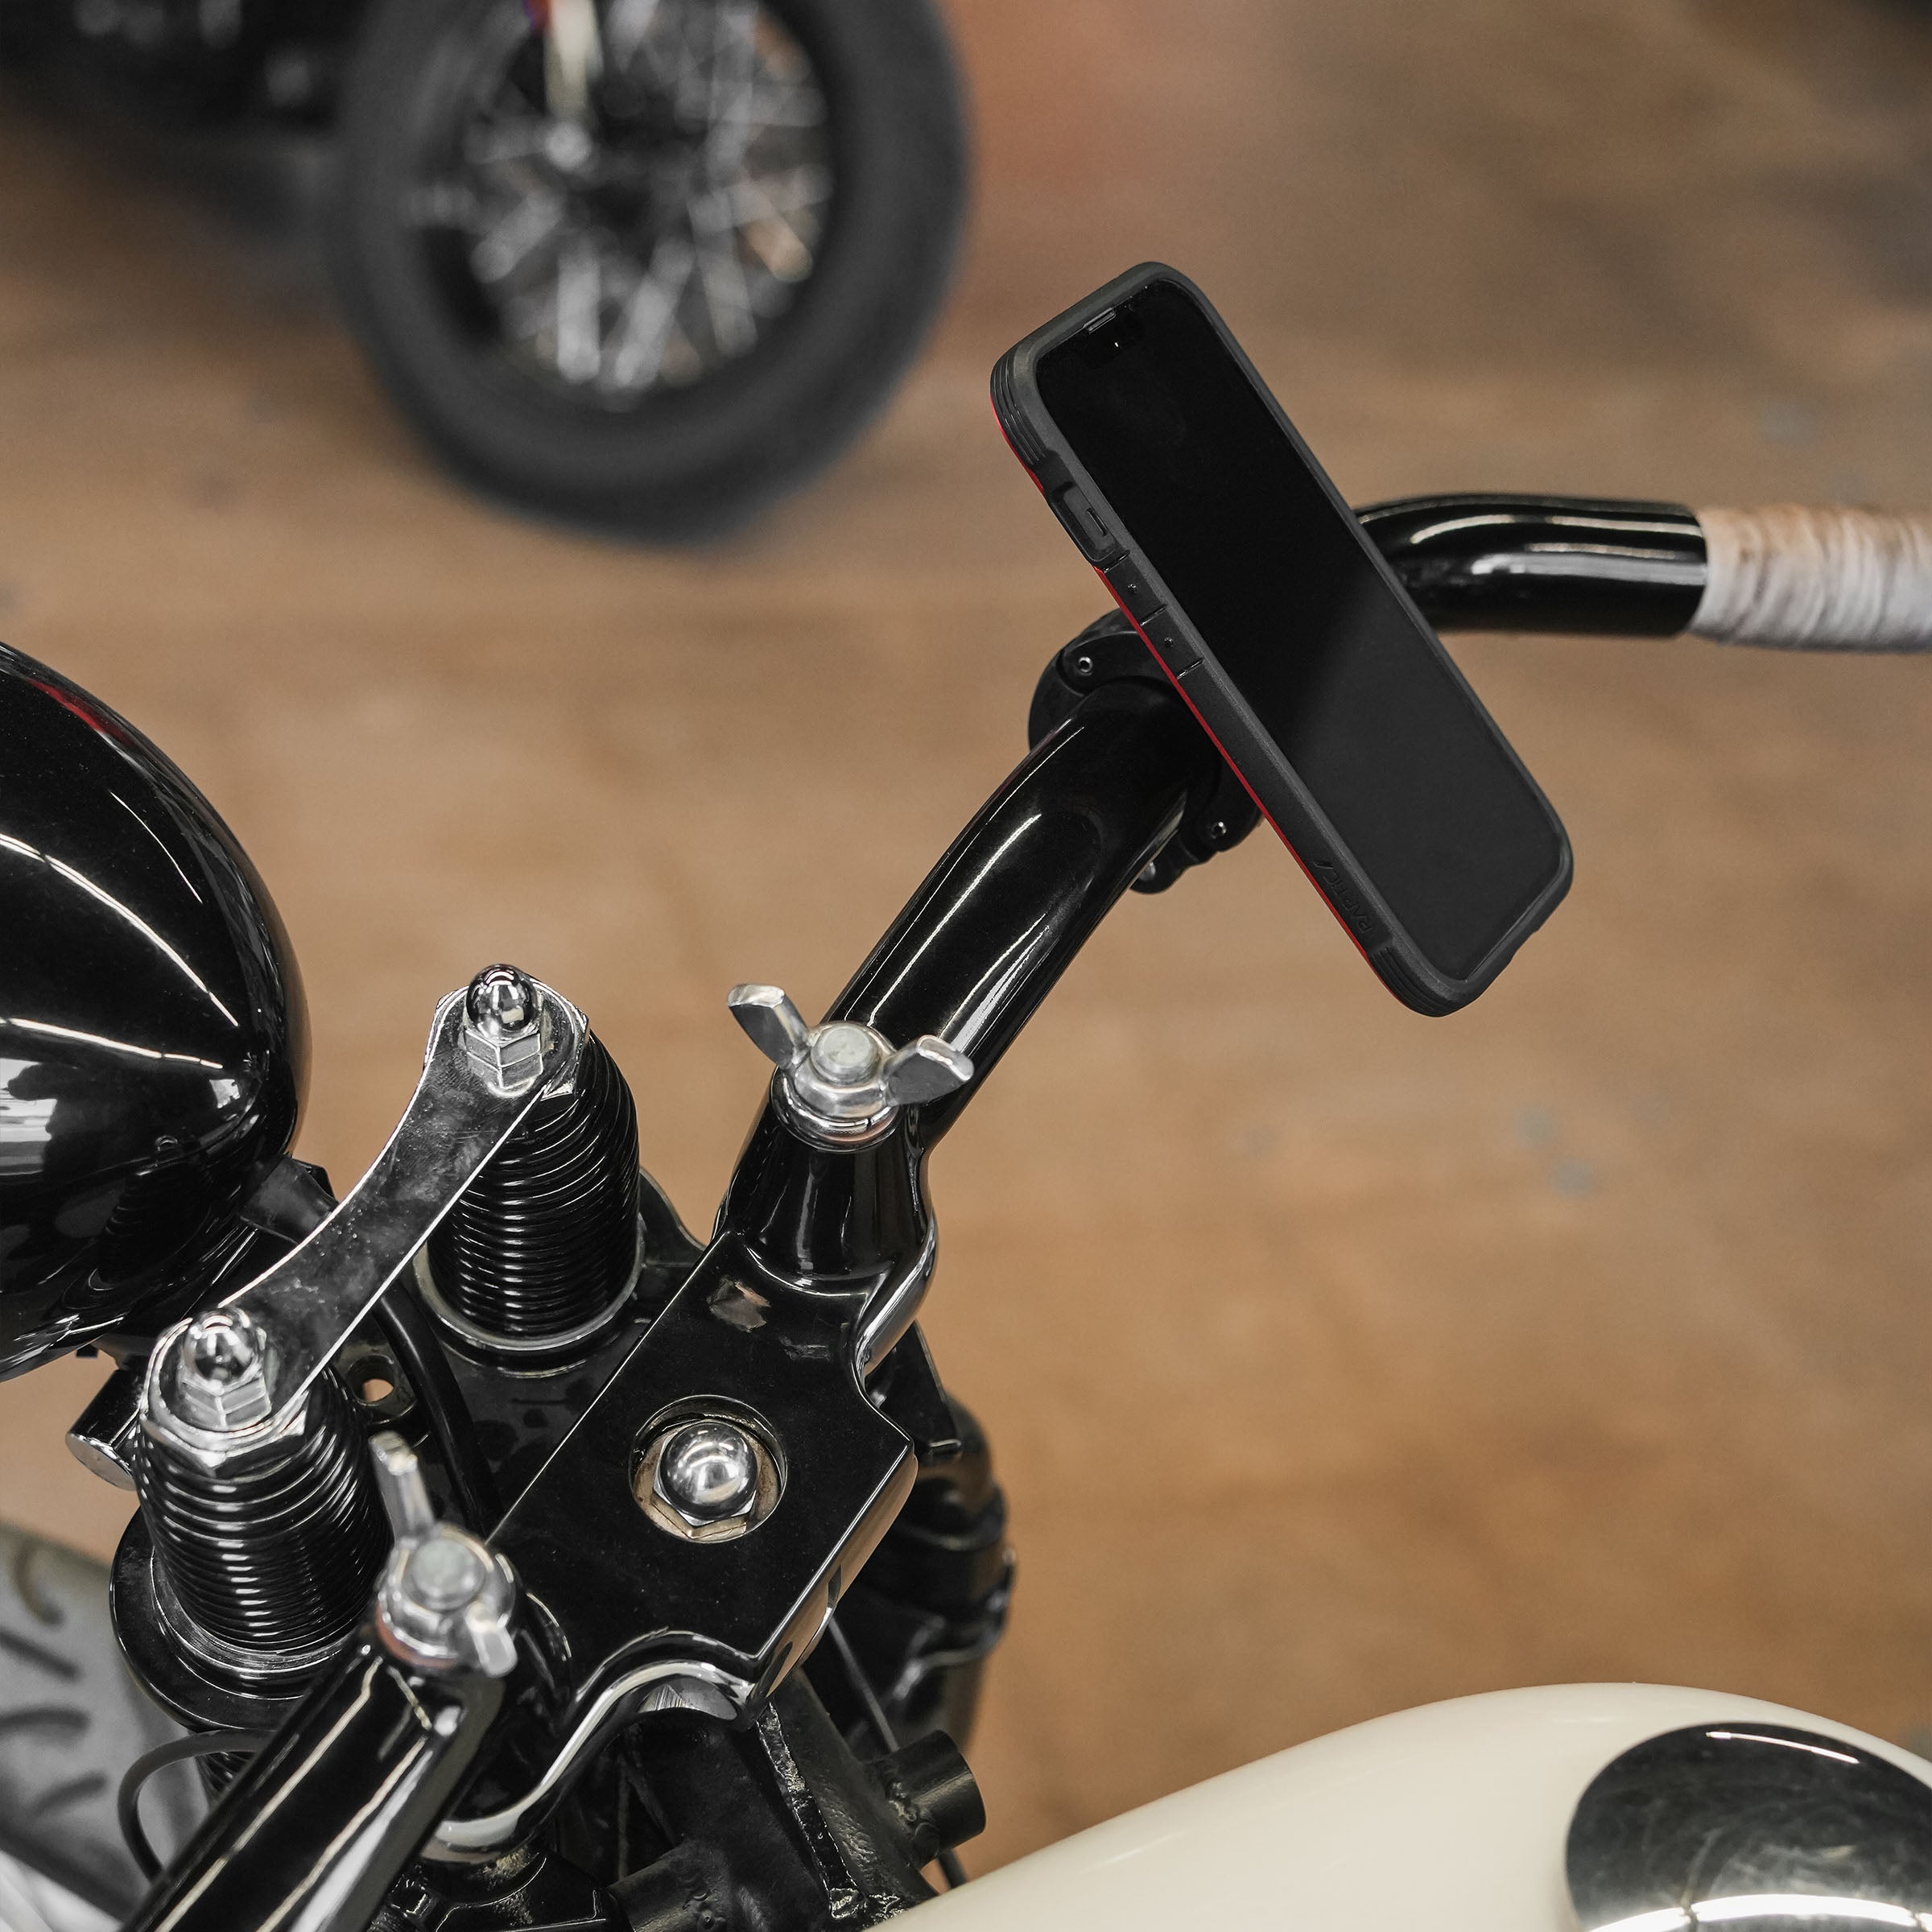 1.25" nomad+ Universal Bar Magnetic Phone Mount shown on motorcycle handlebars(1.25" on motorcycle bars)